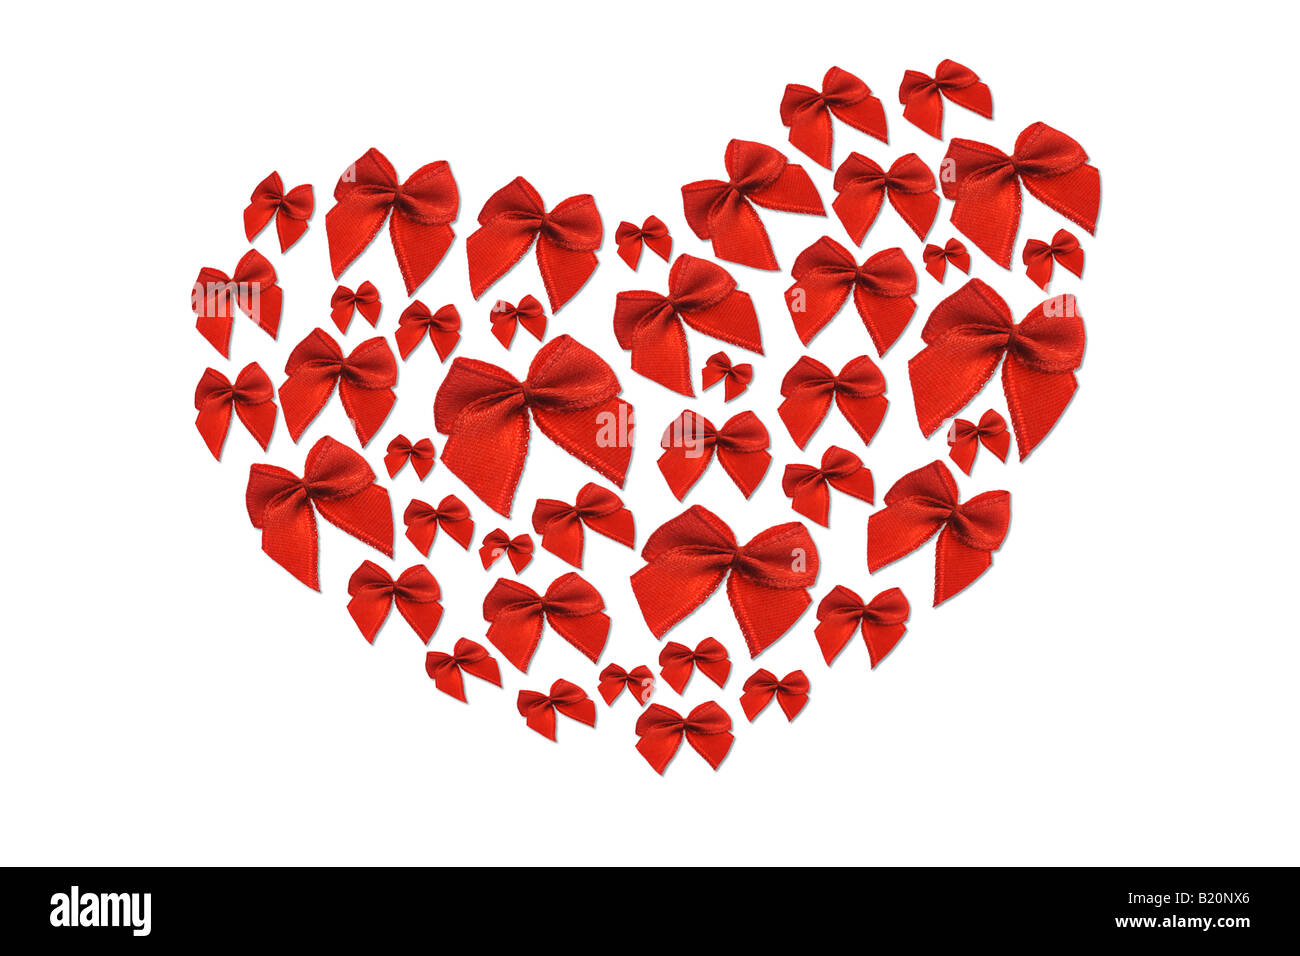 Red decorative bows arranged in heart shape symbol on white background Stock Photo